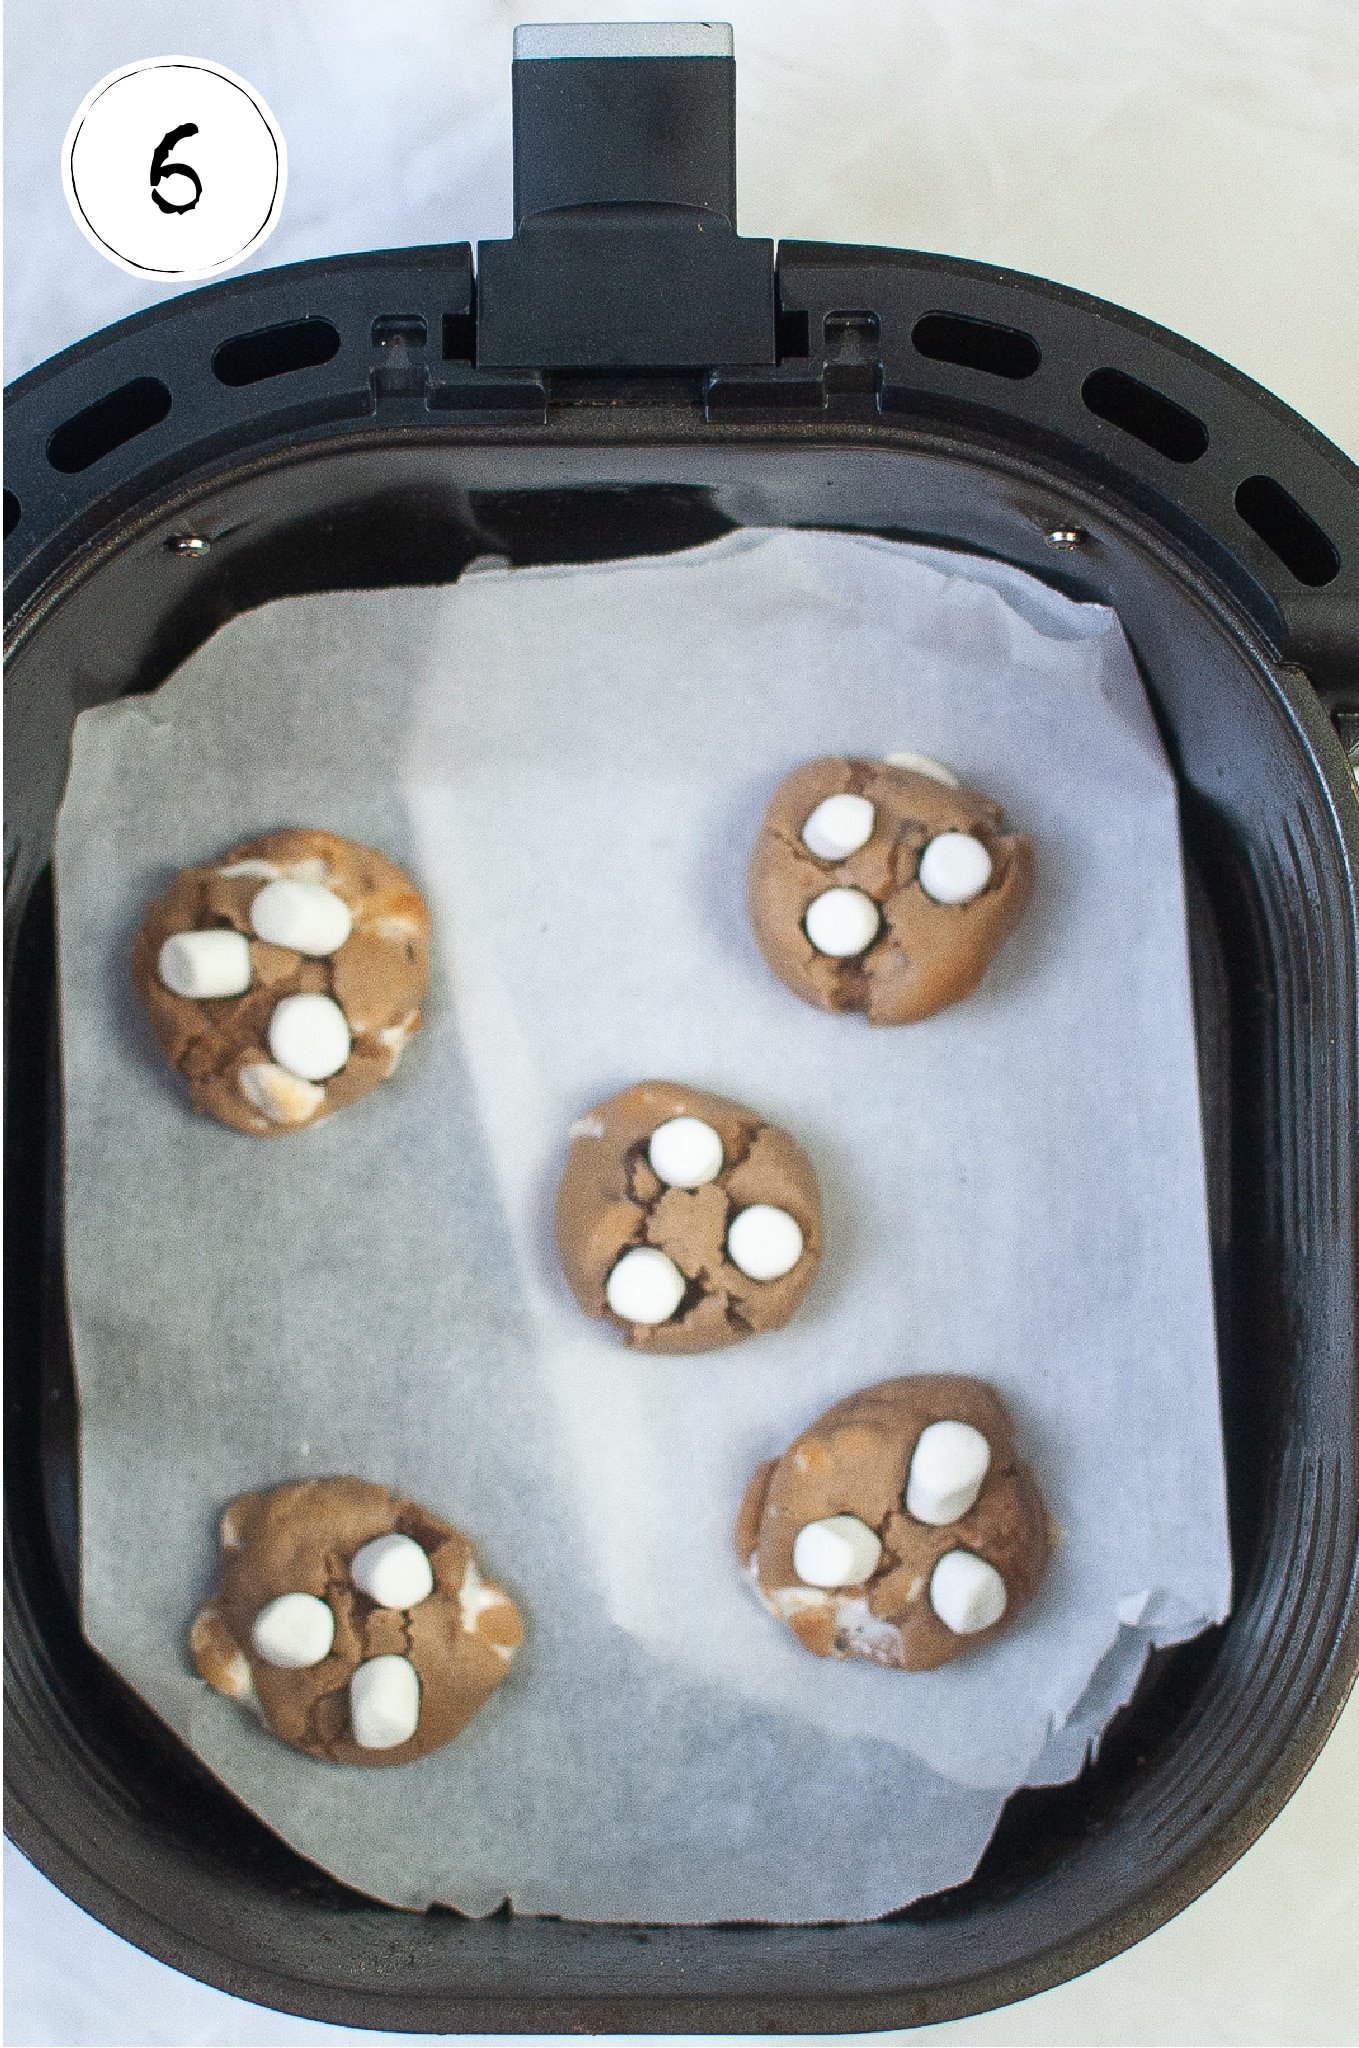 Adding marshmallows to hot chocolate cookies in air fryer.